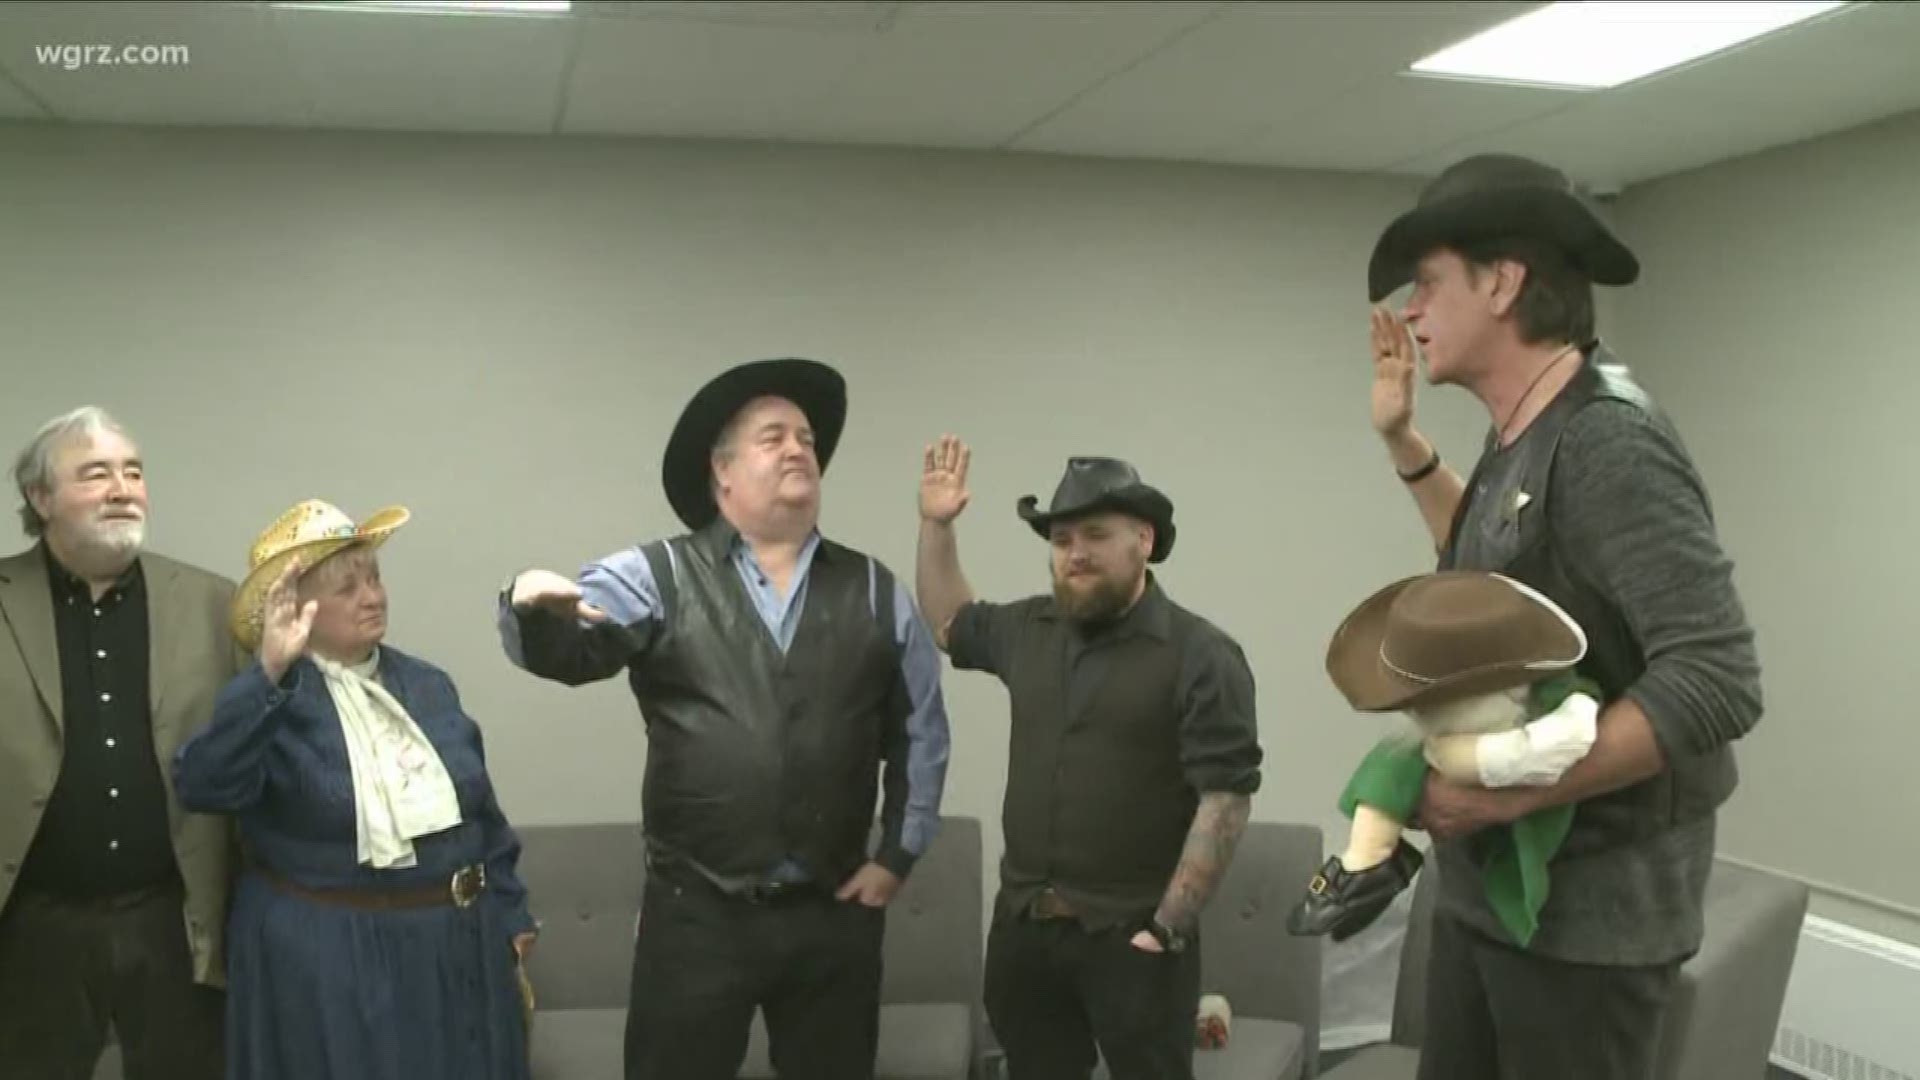 Actors from the beloved Wild West show reunite at WGRZ to share fond memories, discuss the park's impact on Western New York.